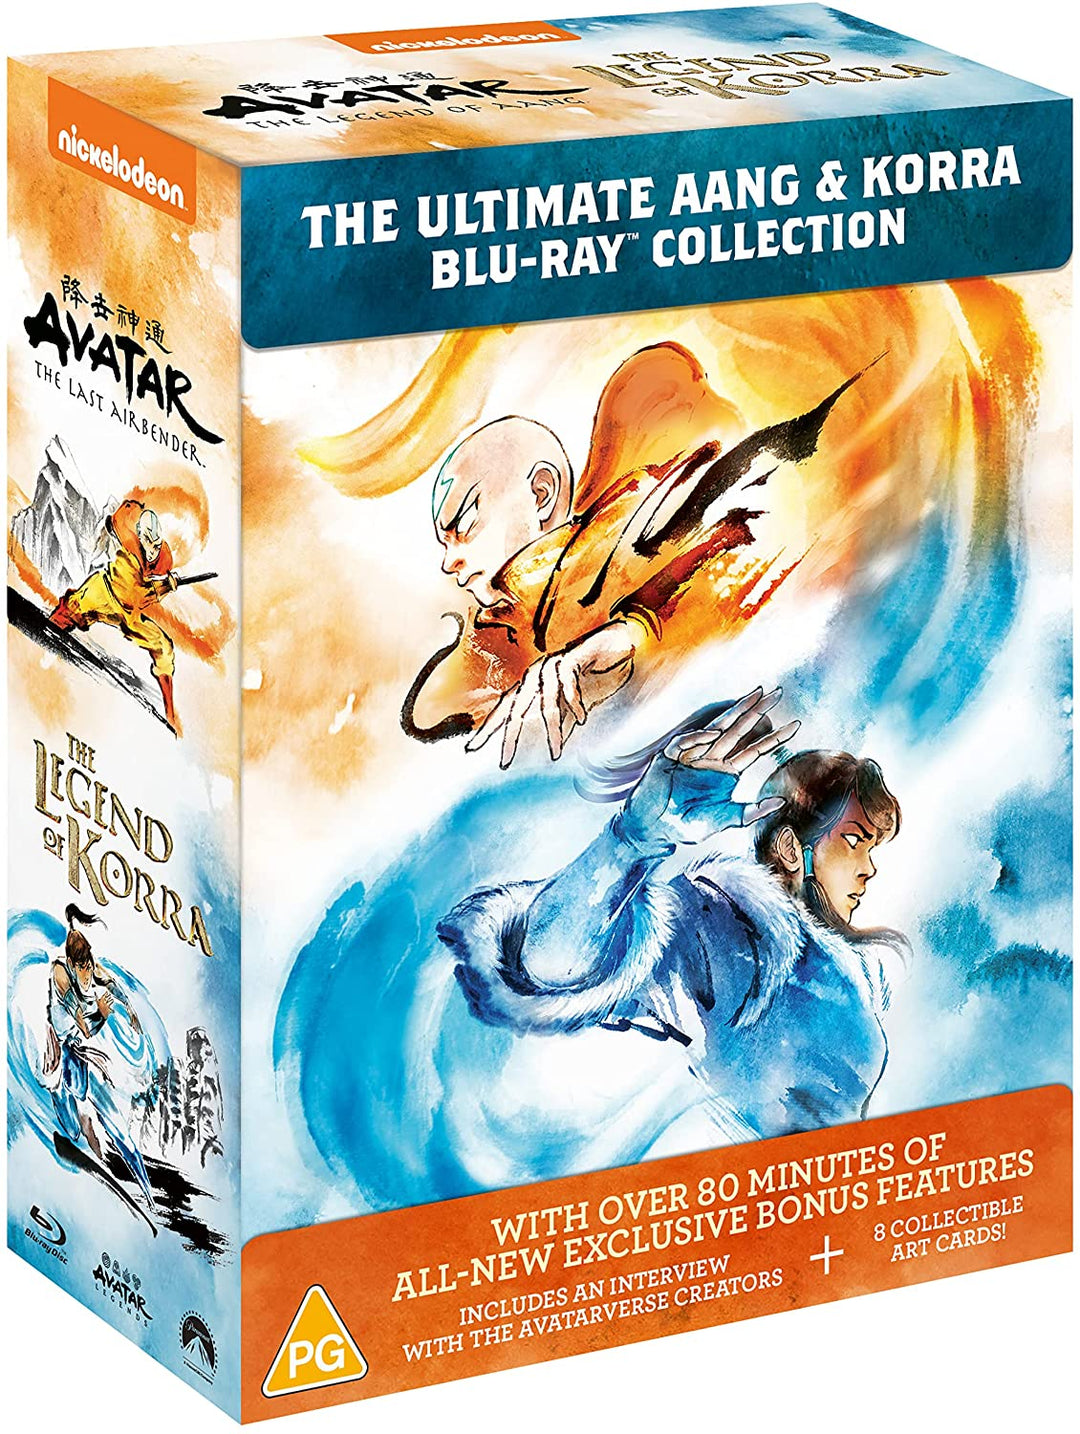 The Ultimate Avatar: The Legend of Aang & The Legend of Korra Complete [Blu-ray]